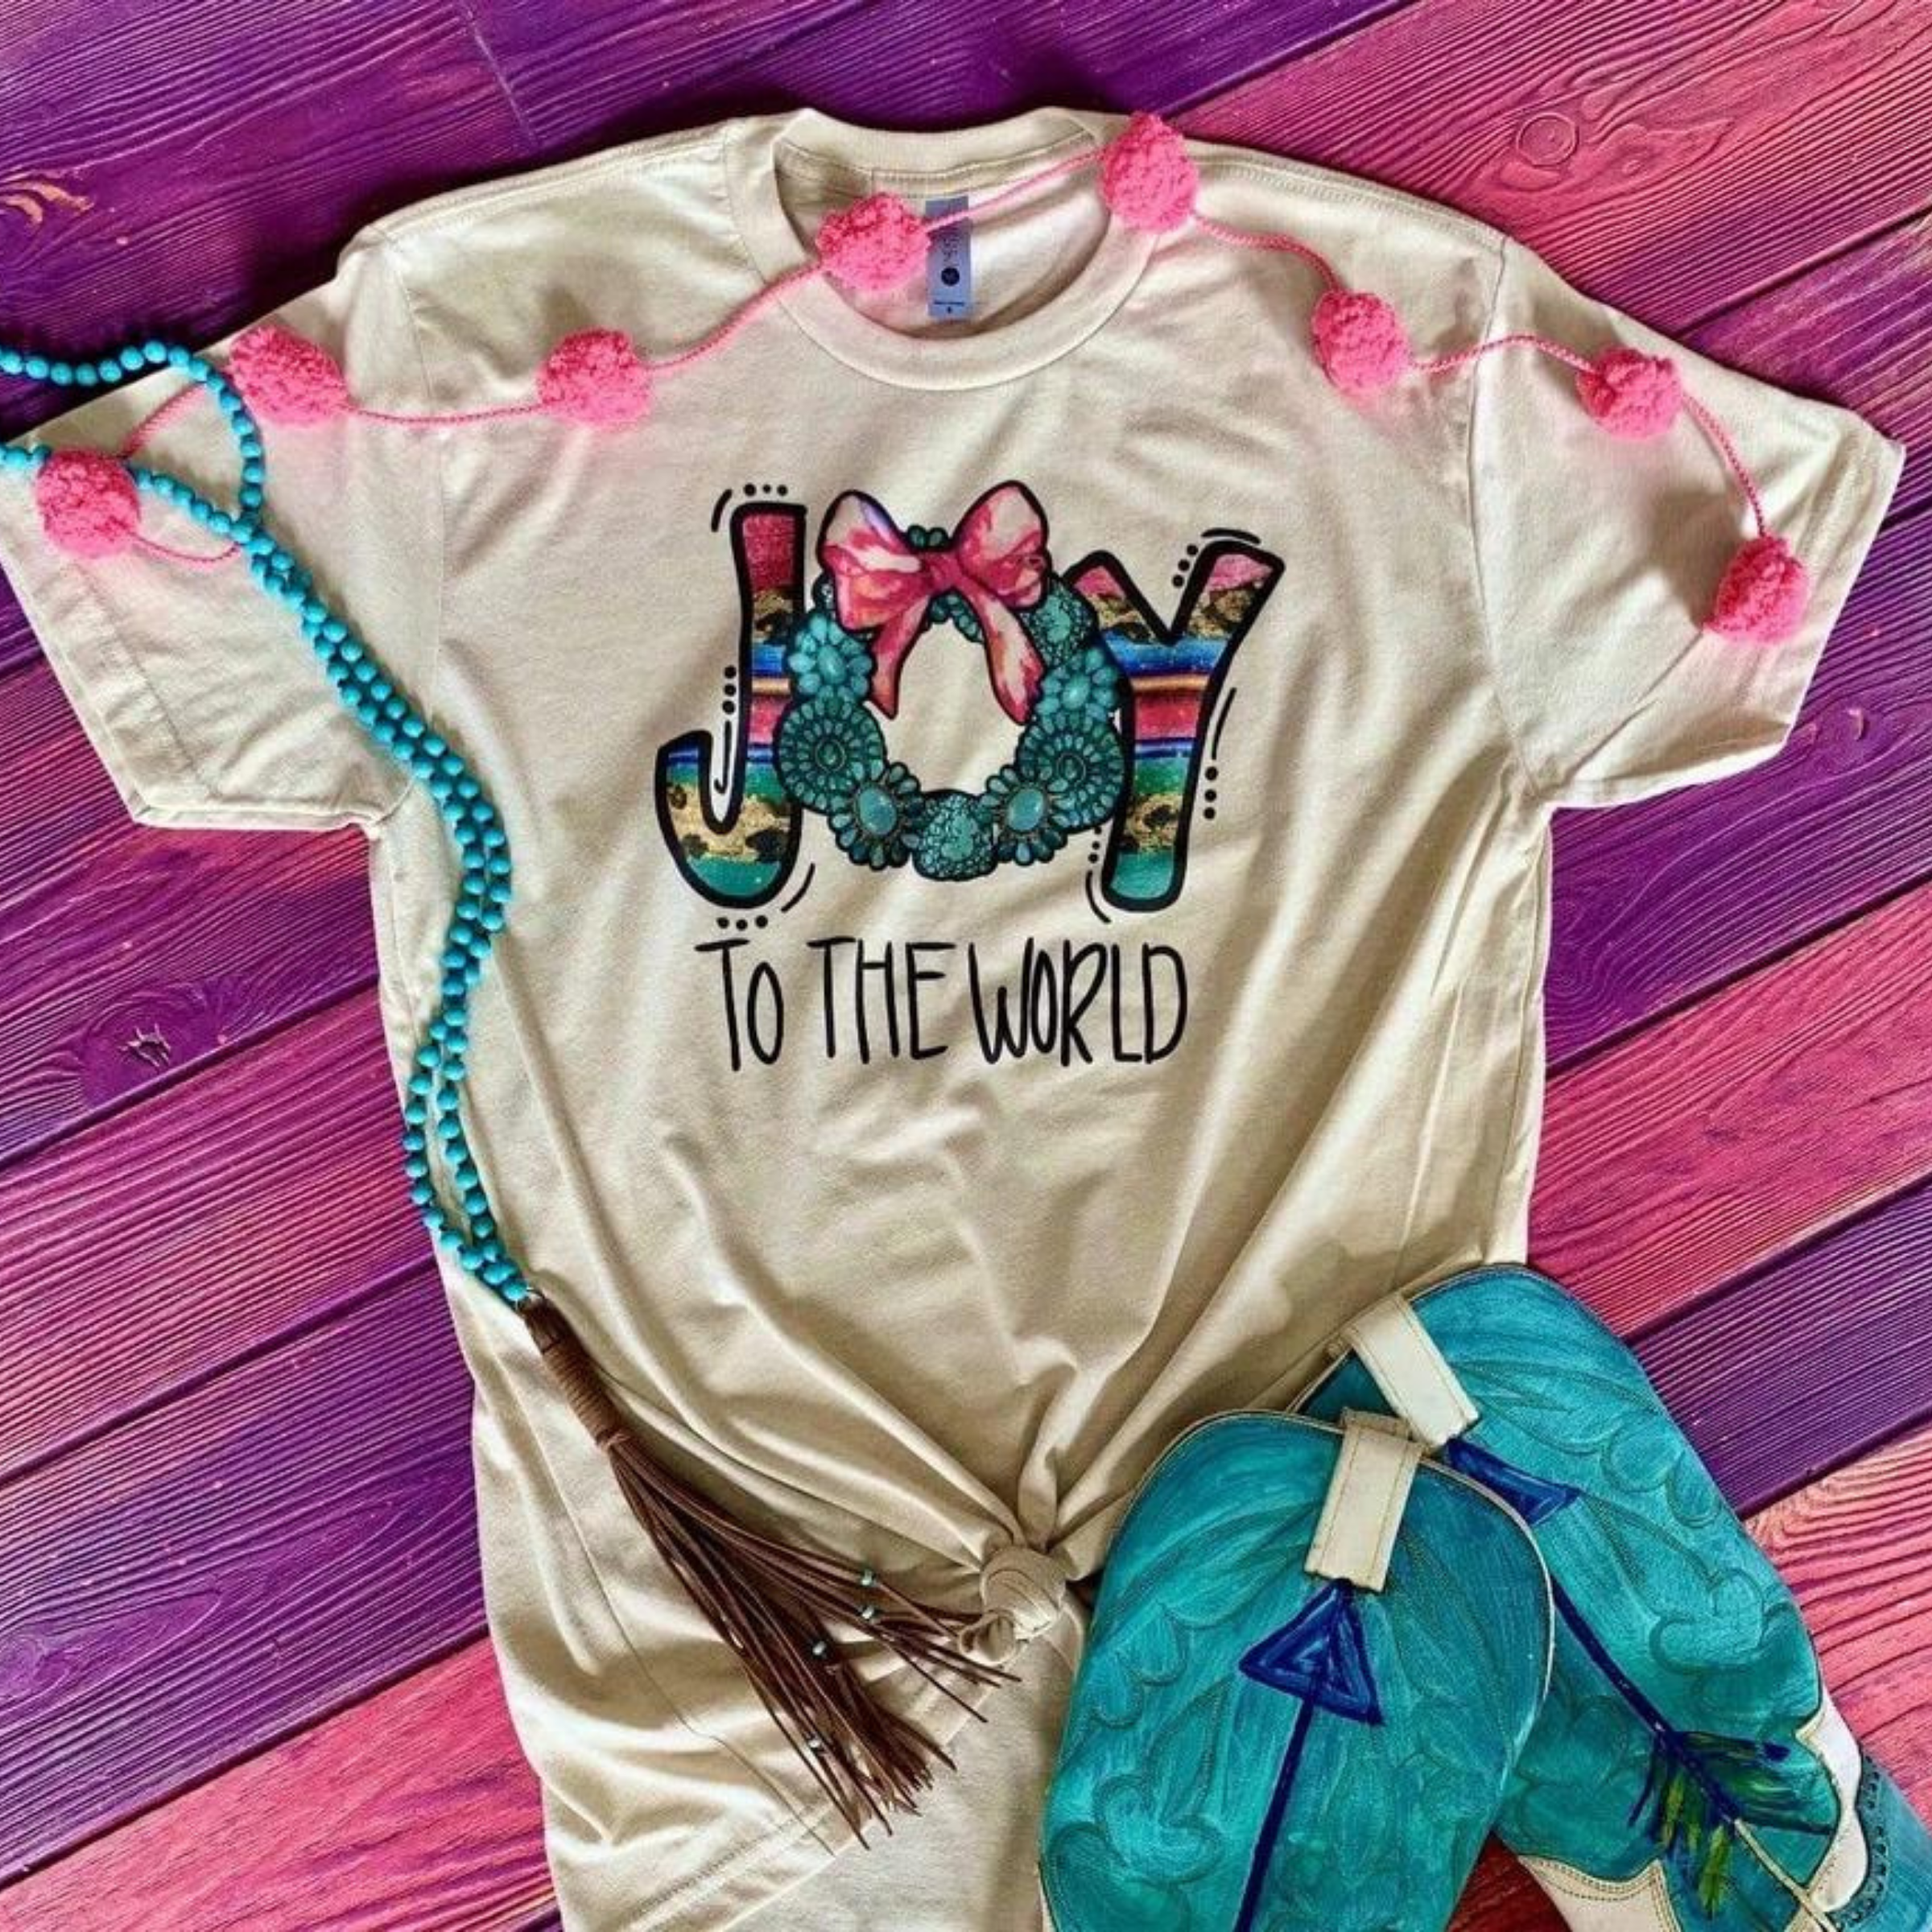 This cream tee includes a crew neckline, short sleeves, and a cute Christmas graphic with the saying "Joy to the World" with the word "JOY" in an uppercase font with serape inside of the J + Y, and the O with turquoise pieces and a pink bow. The words "TO THE WORLD" are uppercase in a handwritten font under the word "JOY". This tee is shown here as a flat lay paired with turquoise cowboy boots and a turquoise necklace with a brown tassel. 